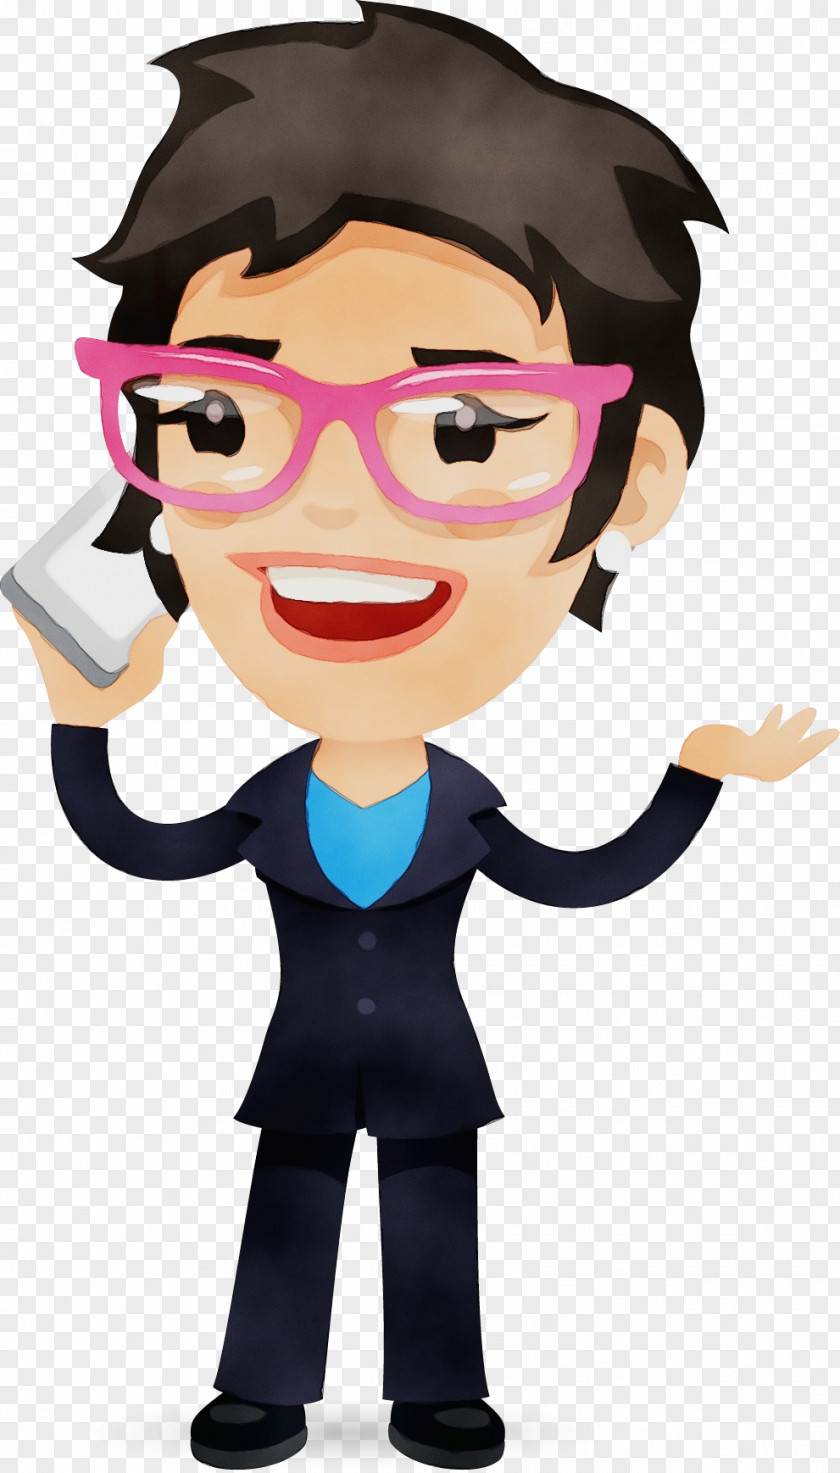 Fictional Character Smile Cartoon Clip Art Finger Animated Gesture PNG